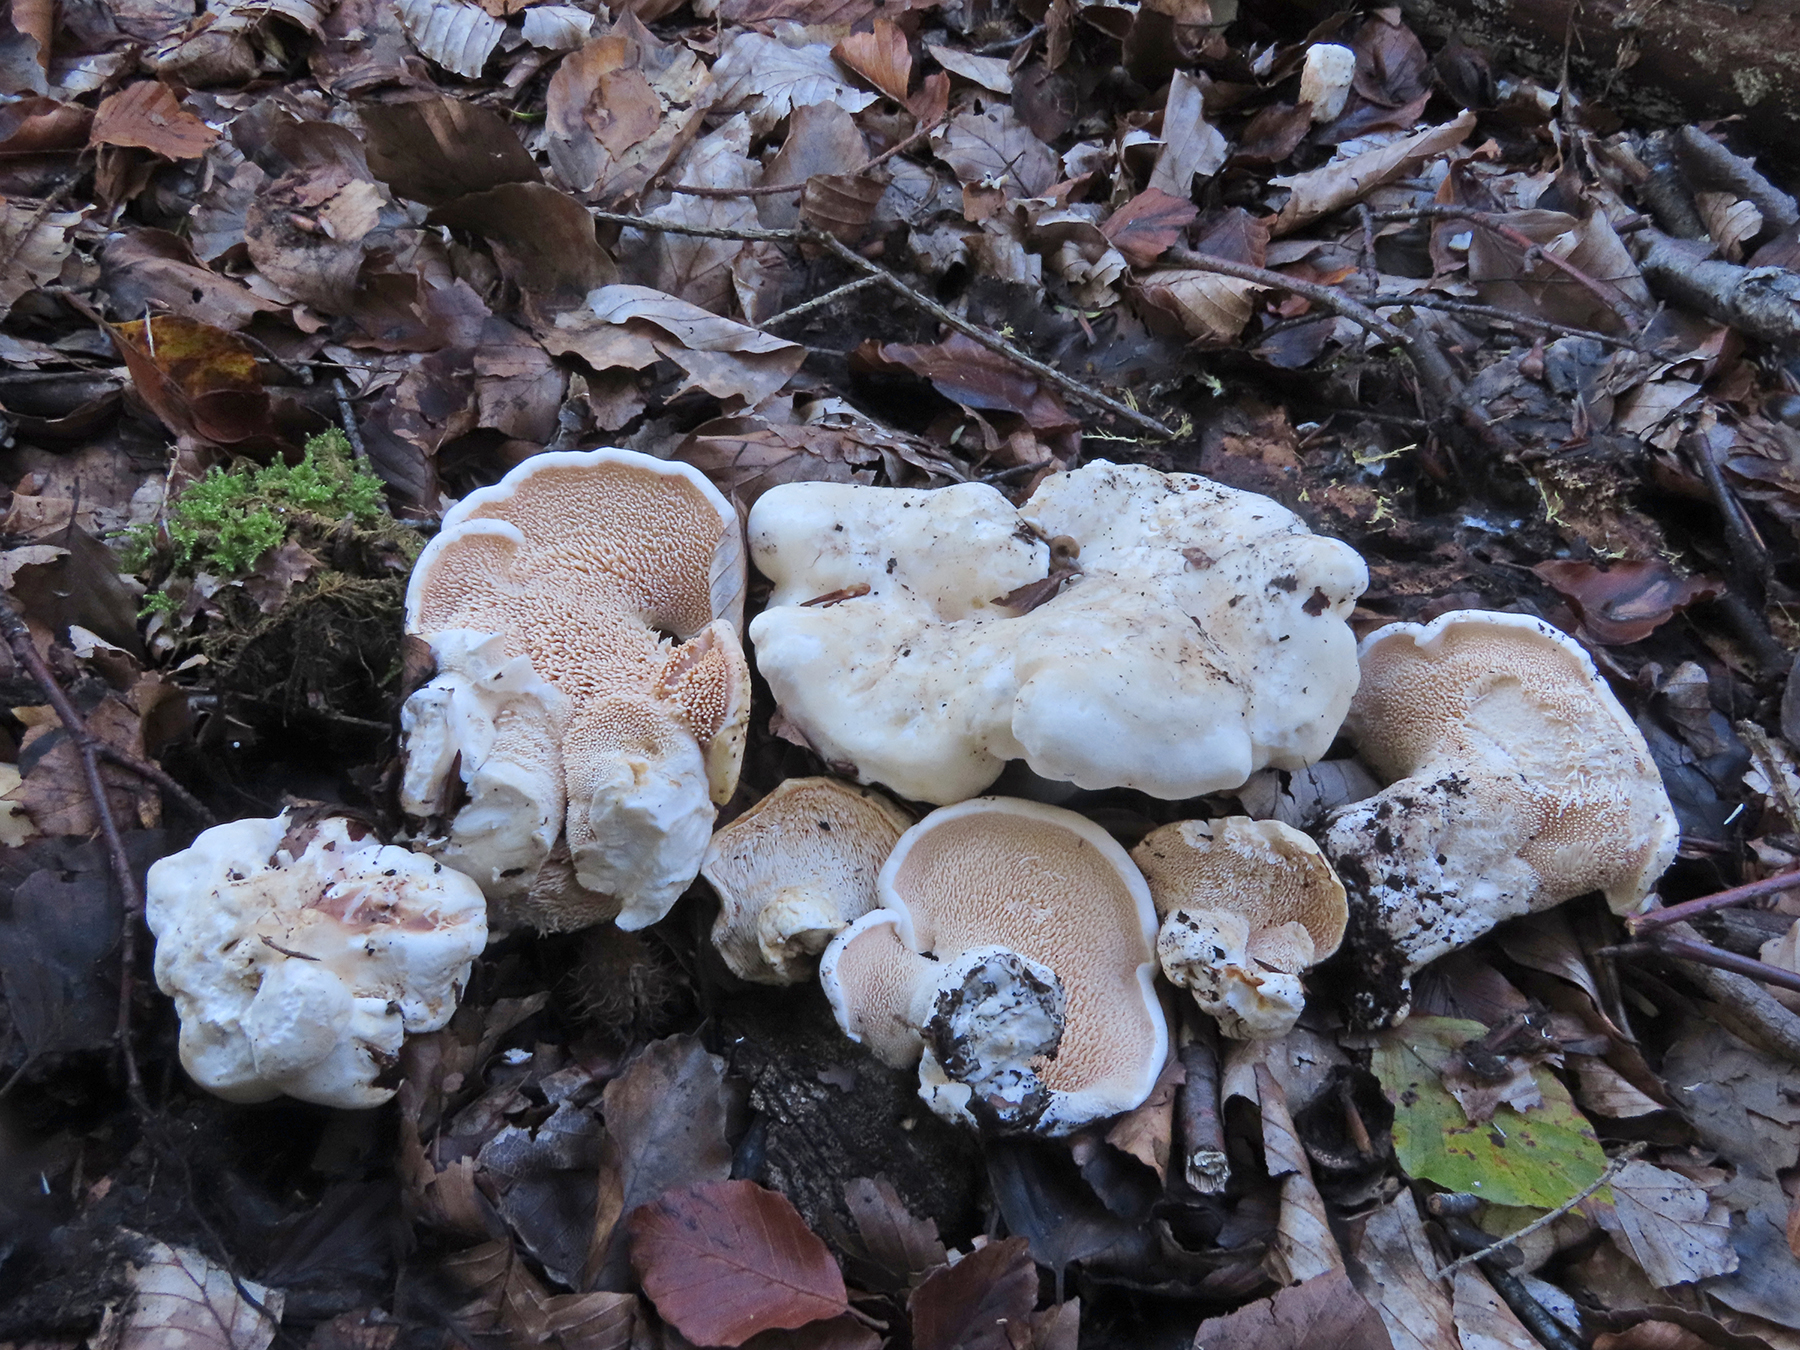 A white mass of fungus has emerged from soil and leaf litter, it has the shape of a popcorn kernel though is unlikely to taste the same.